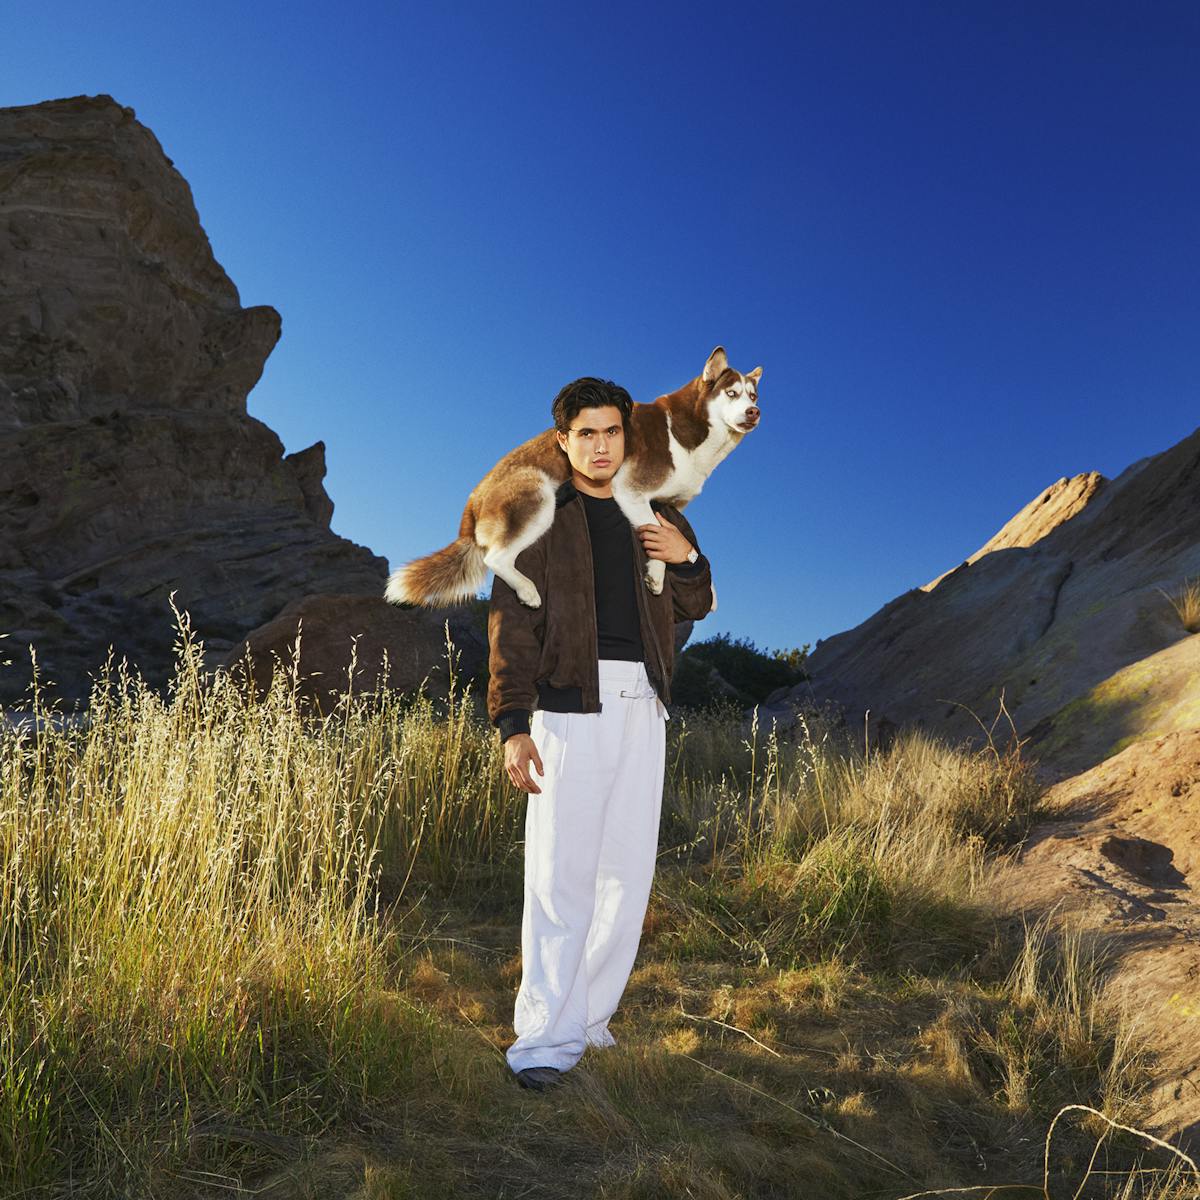 Charles Melton stands in the desert with his dog, Neya, wrapped around his shoulders.